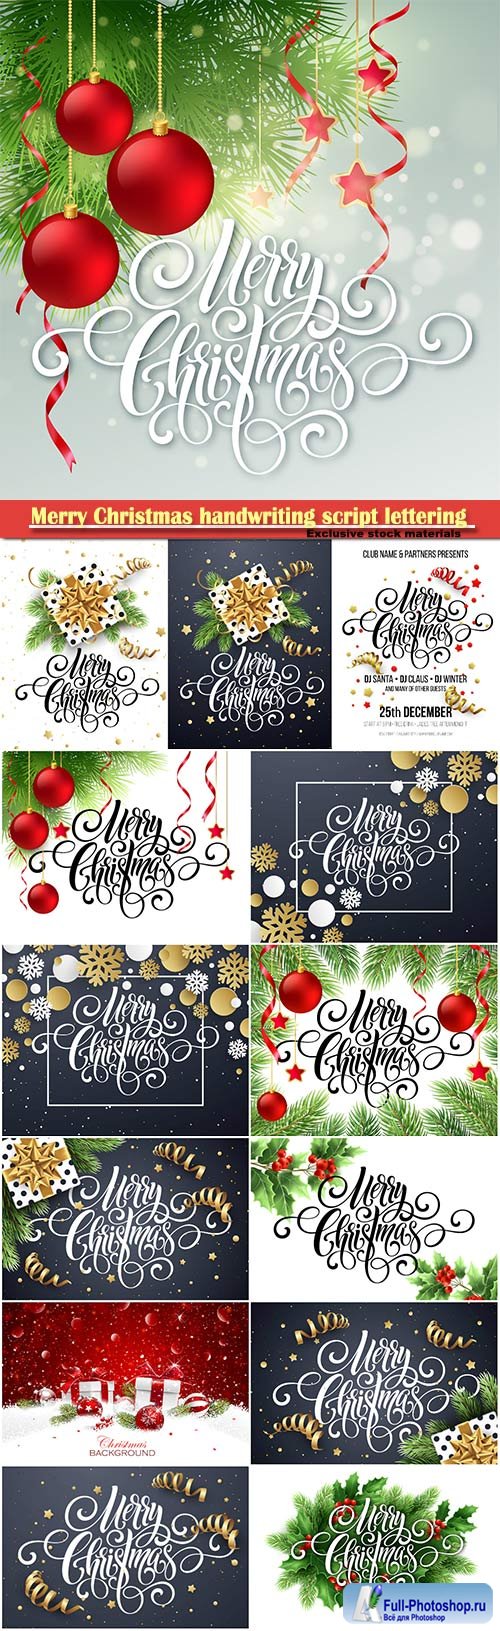 Merry Christmas handwriting script lettering, vector Christmas tree and decorations